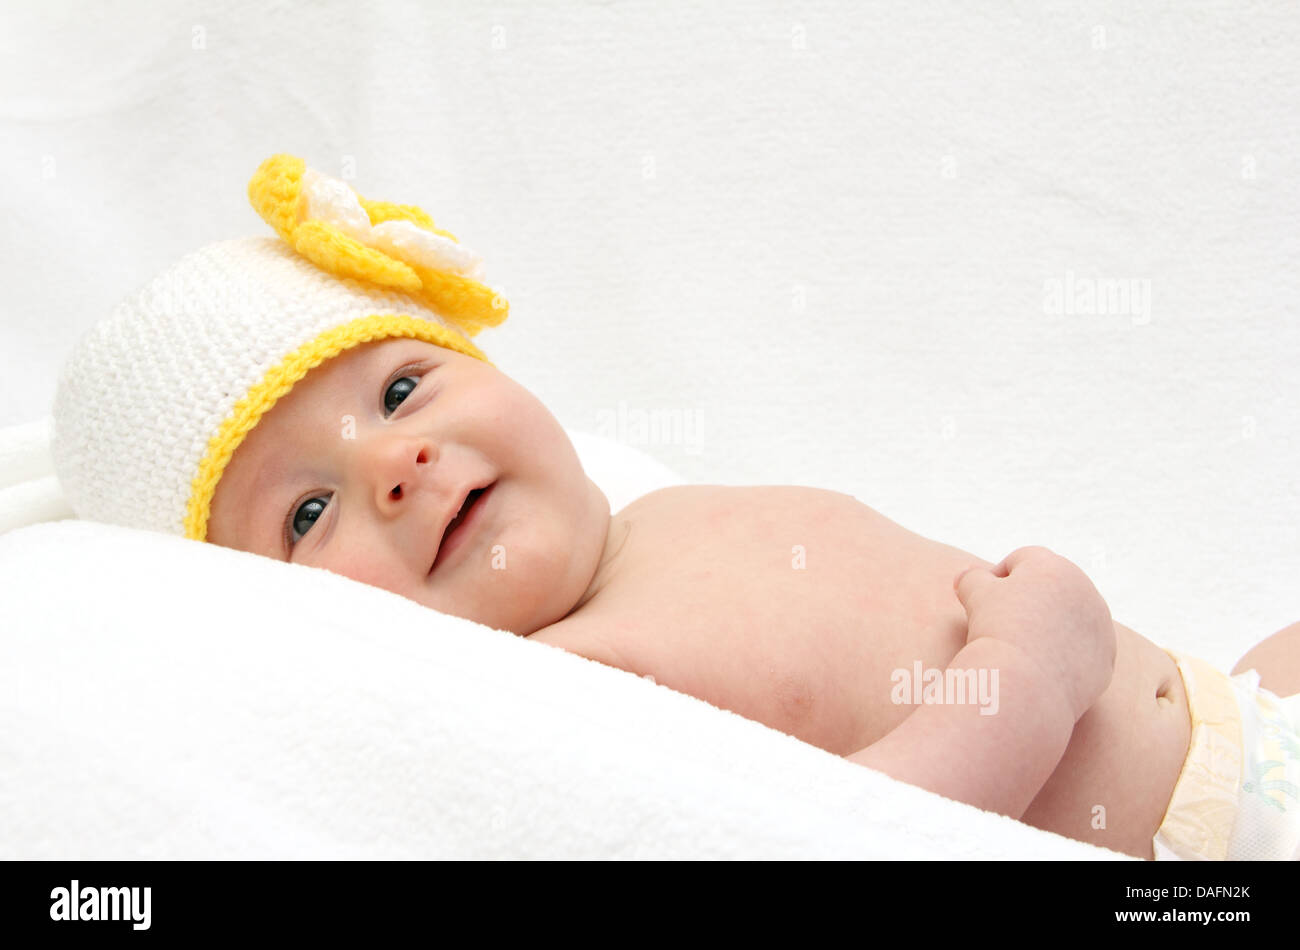 Baby with knitted white hat baby on back Stock Photo